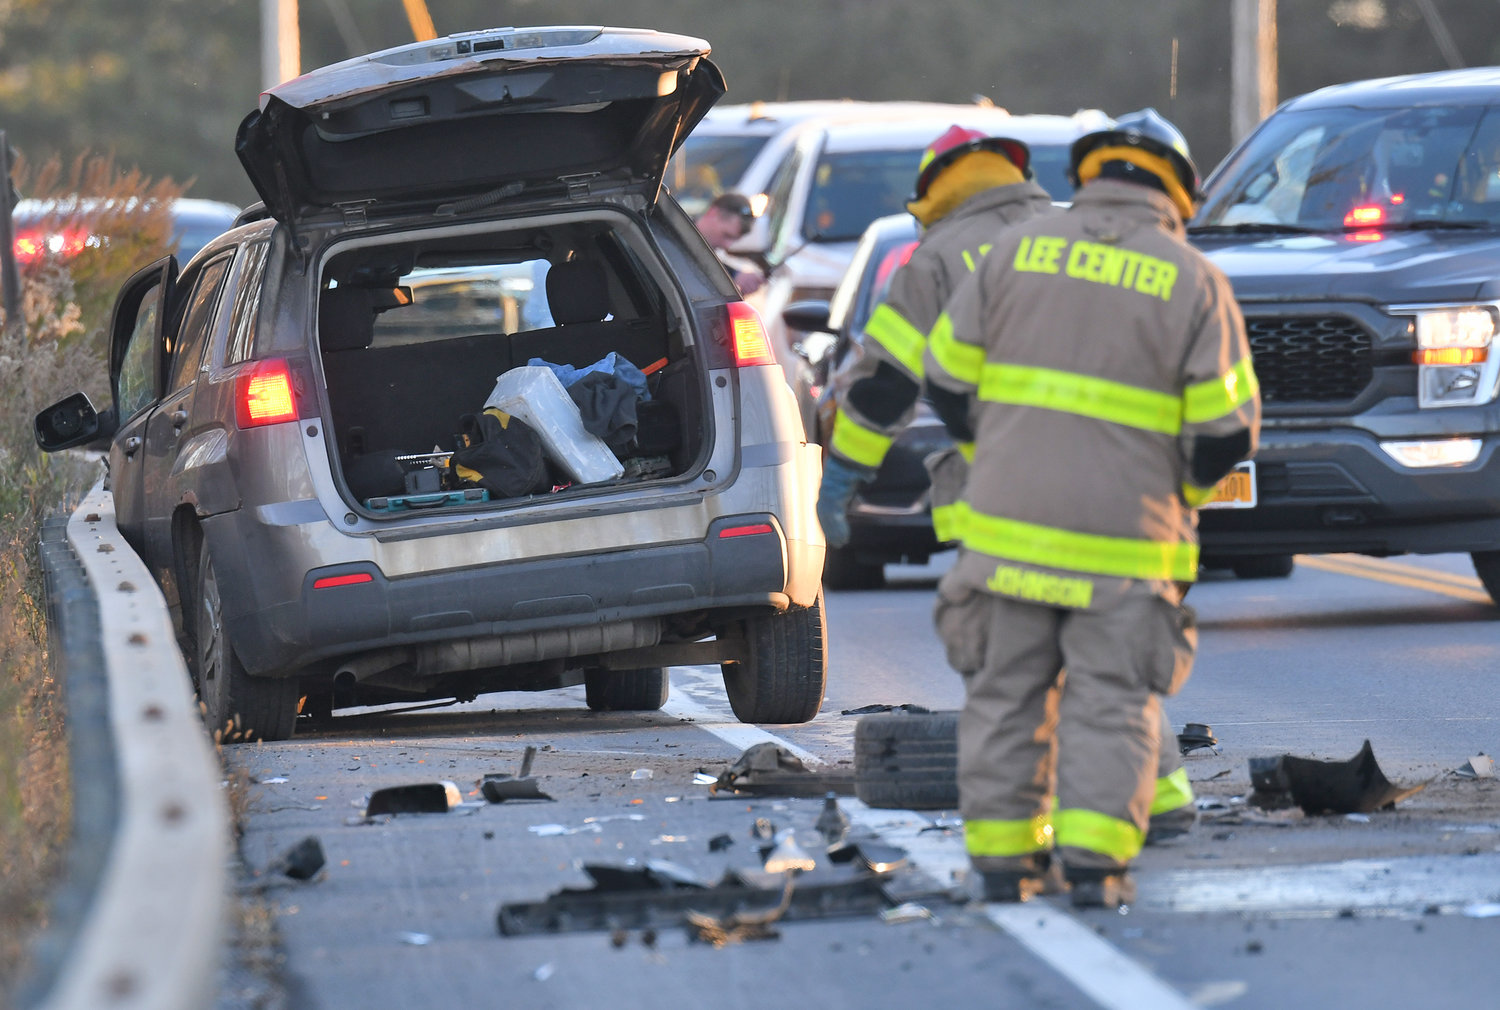 One of the cars involved in a head-on collision on Turin Road Thursday afternoon. Both drivers were transported to hospitals. Lee Center Fire Department, Oneida County Sheriff, AmCare and State Troopers were on the scene. Turin Road was shut down from Cemetery Road to Stokes-Westernville Road intersection.